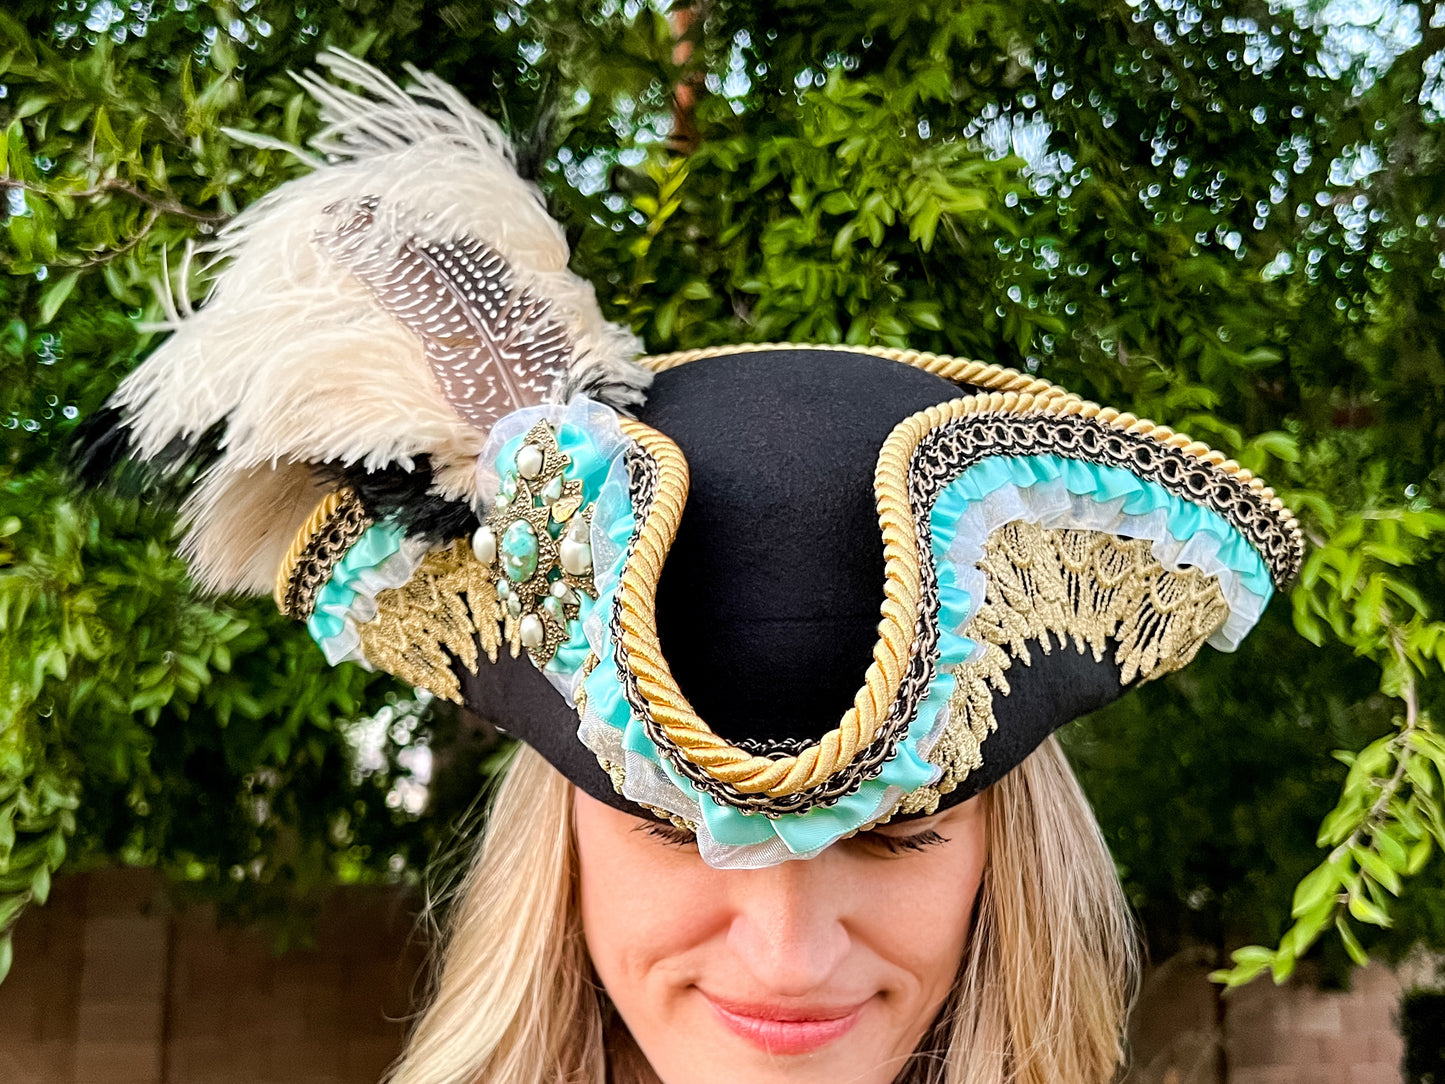 Tricorn Hat 22" Black Polyester Base with Gold Trim, Feathers, and Turquoise Brooch